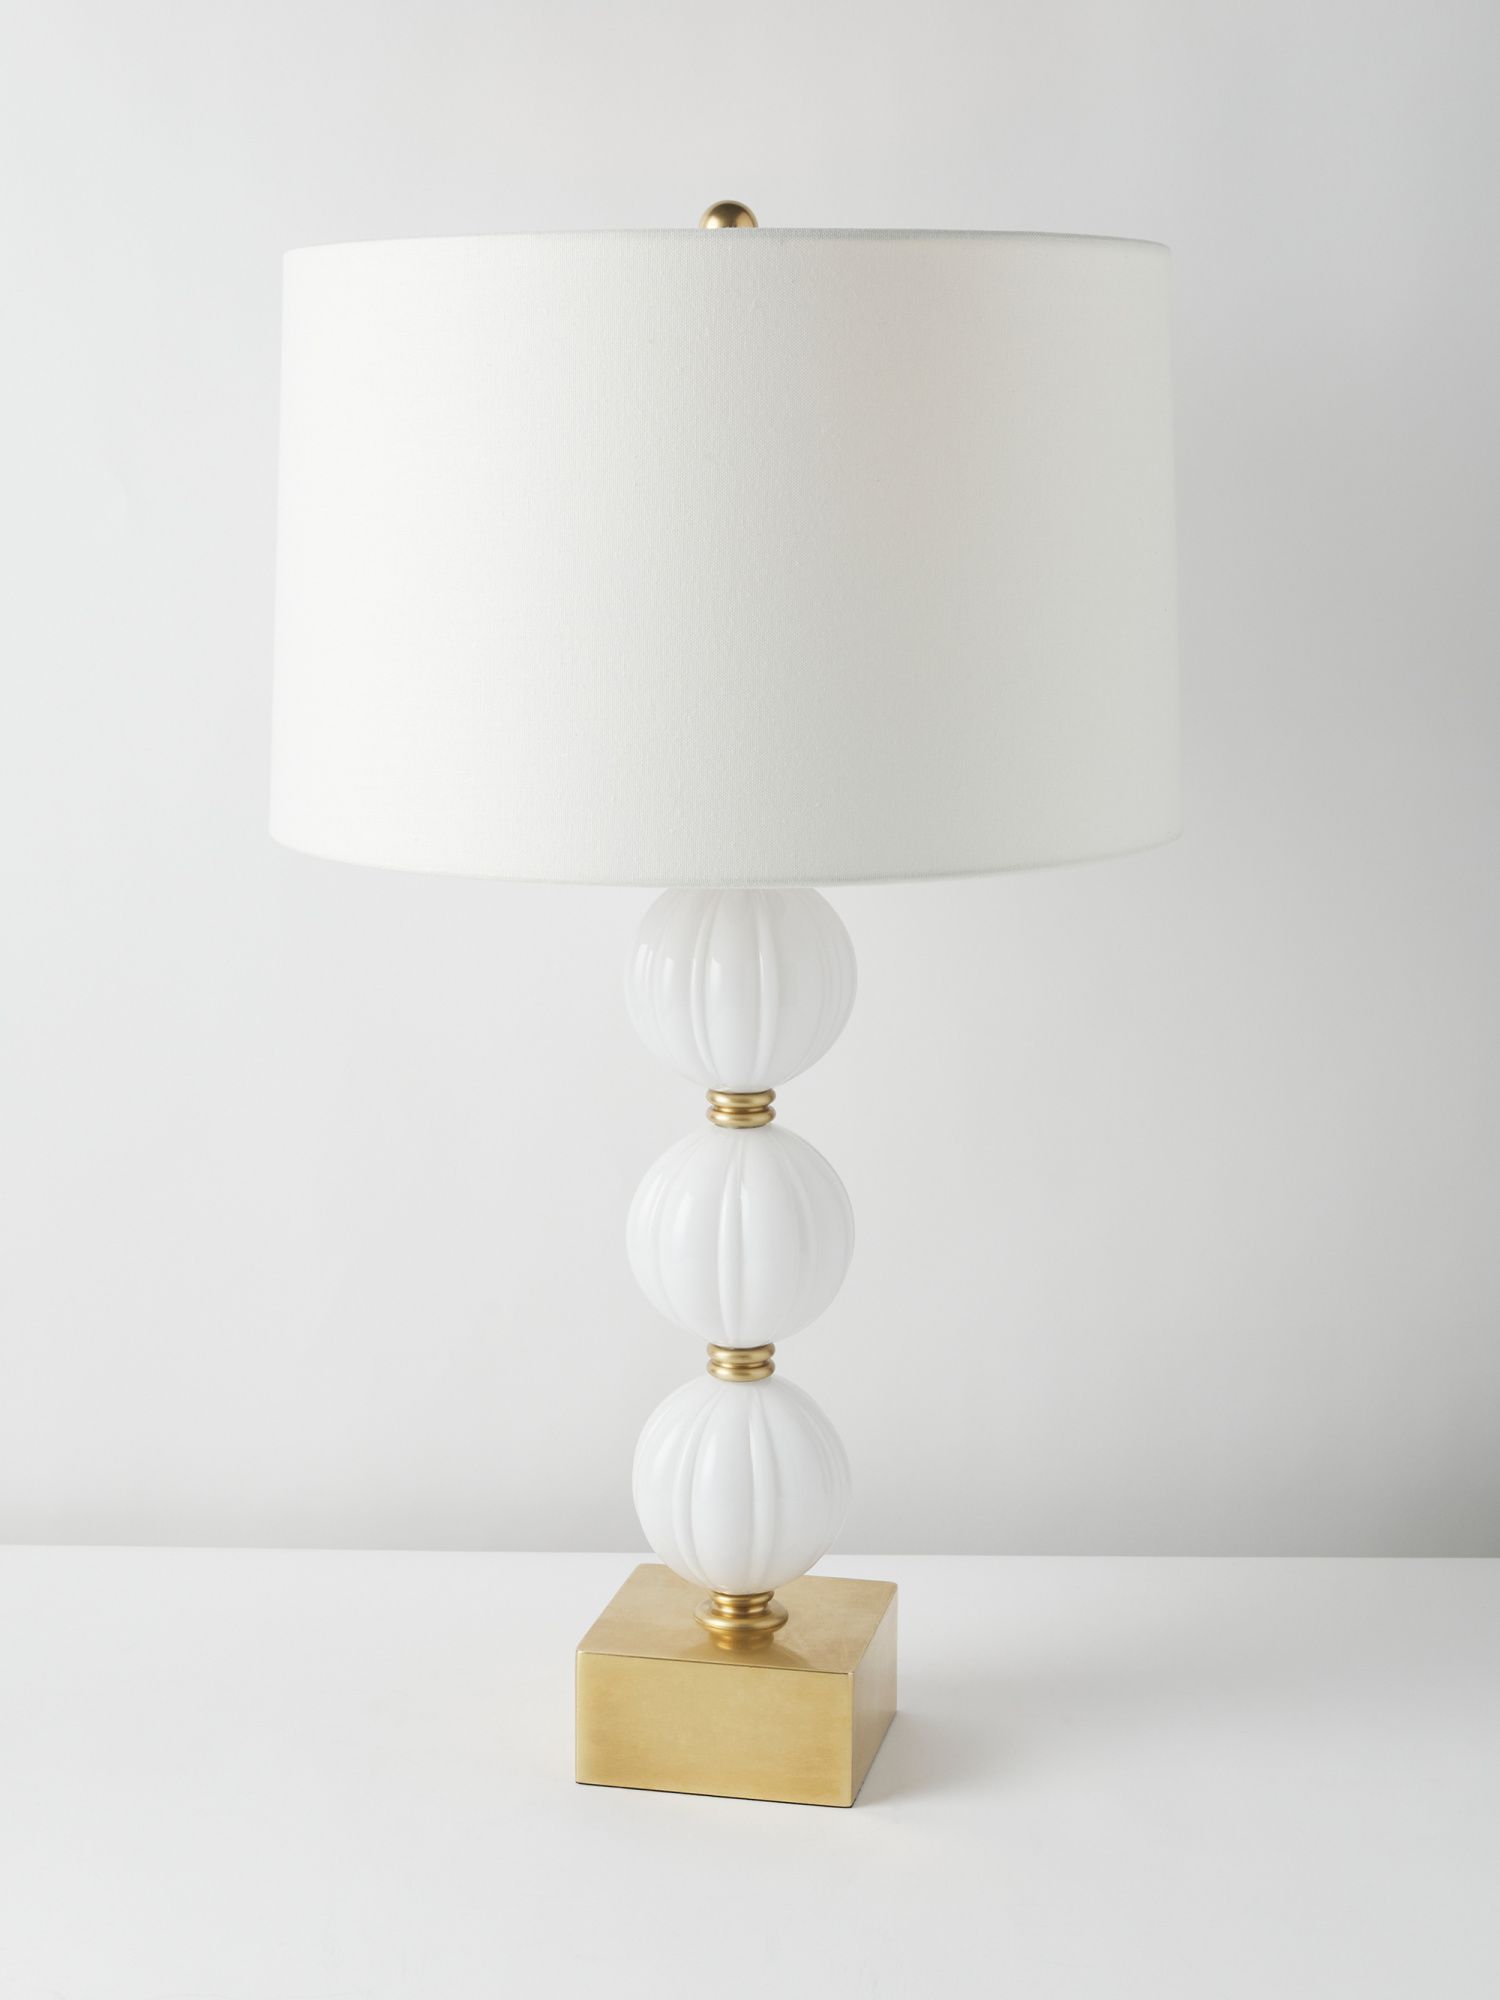 29in Glass And Metal Table Lamp | Lighting | HomeGoods | HomeGoods